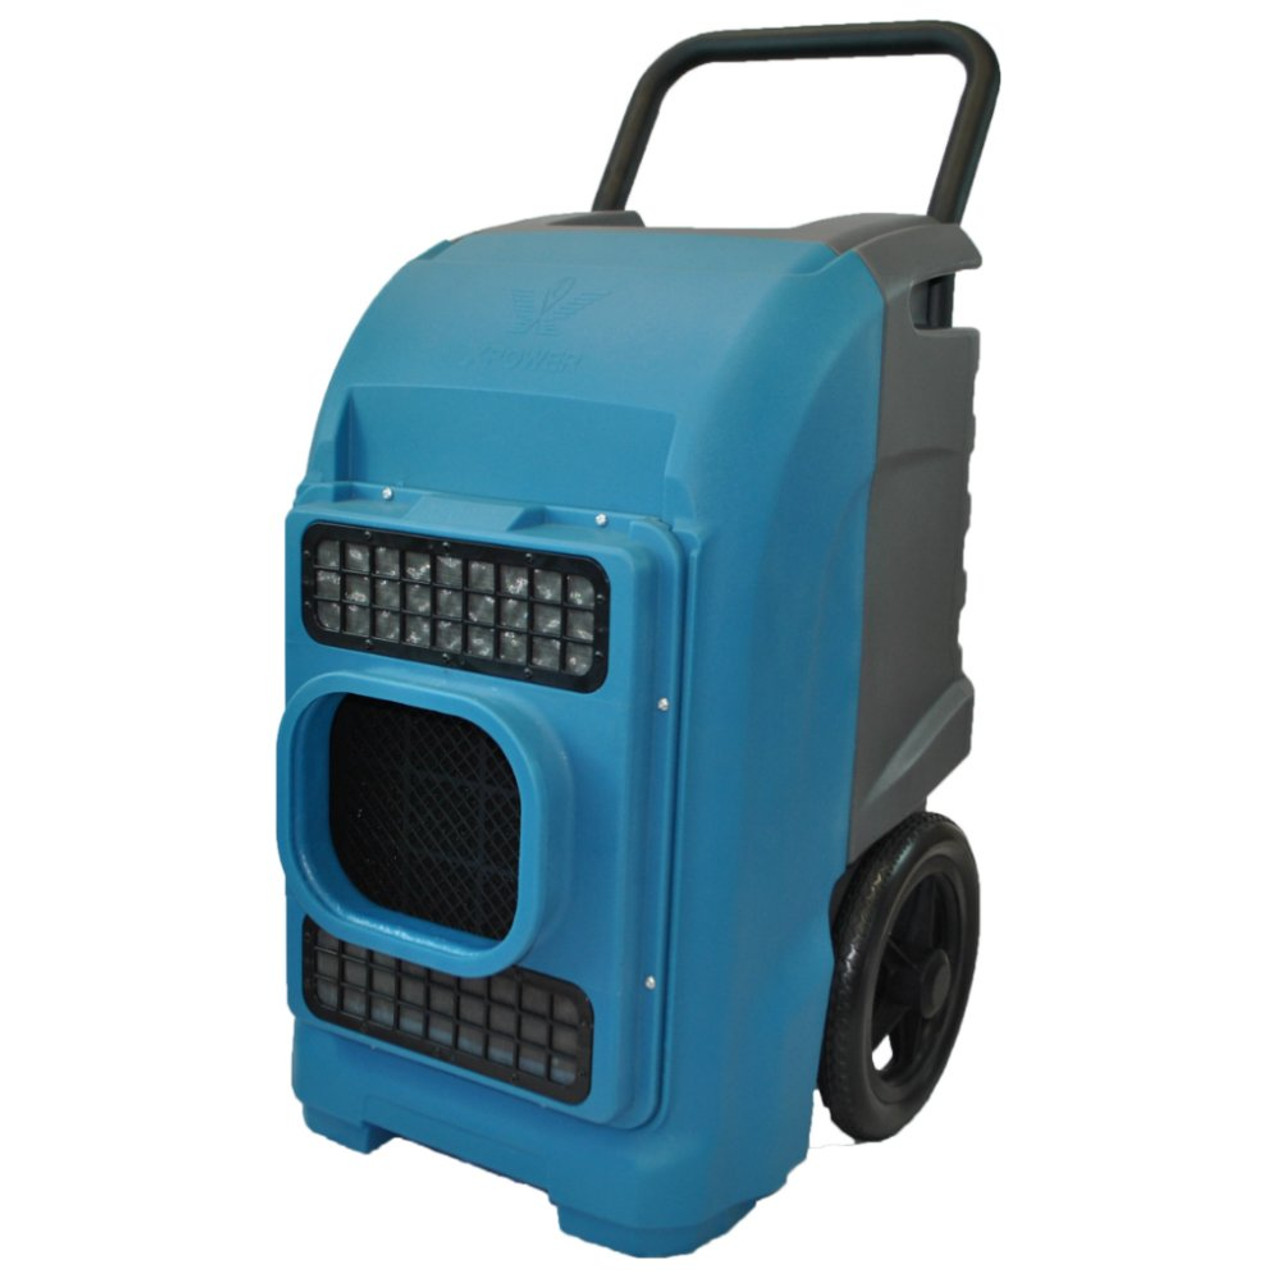 XPOWER XD-125 Industrial Commercial Dehumidifier to Dry basements, Large Rooms, Work Sites- Flood Damage Treatment, Moisture, and Prevent Mold